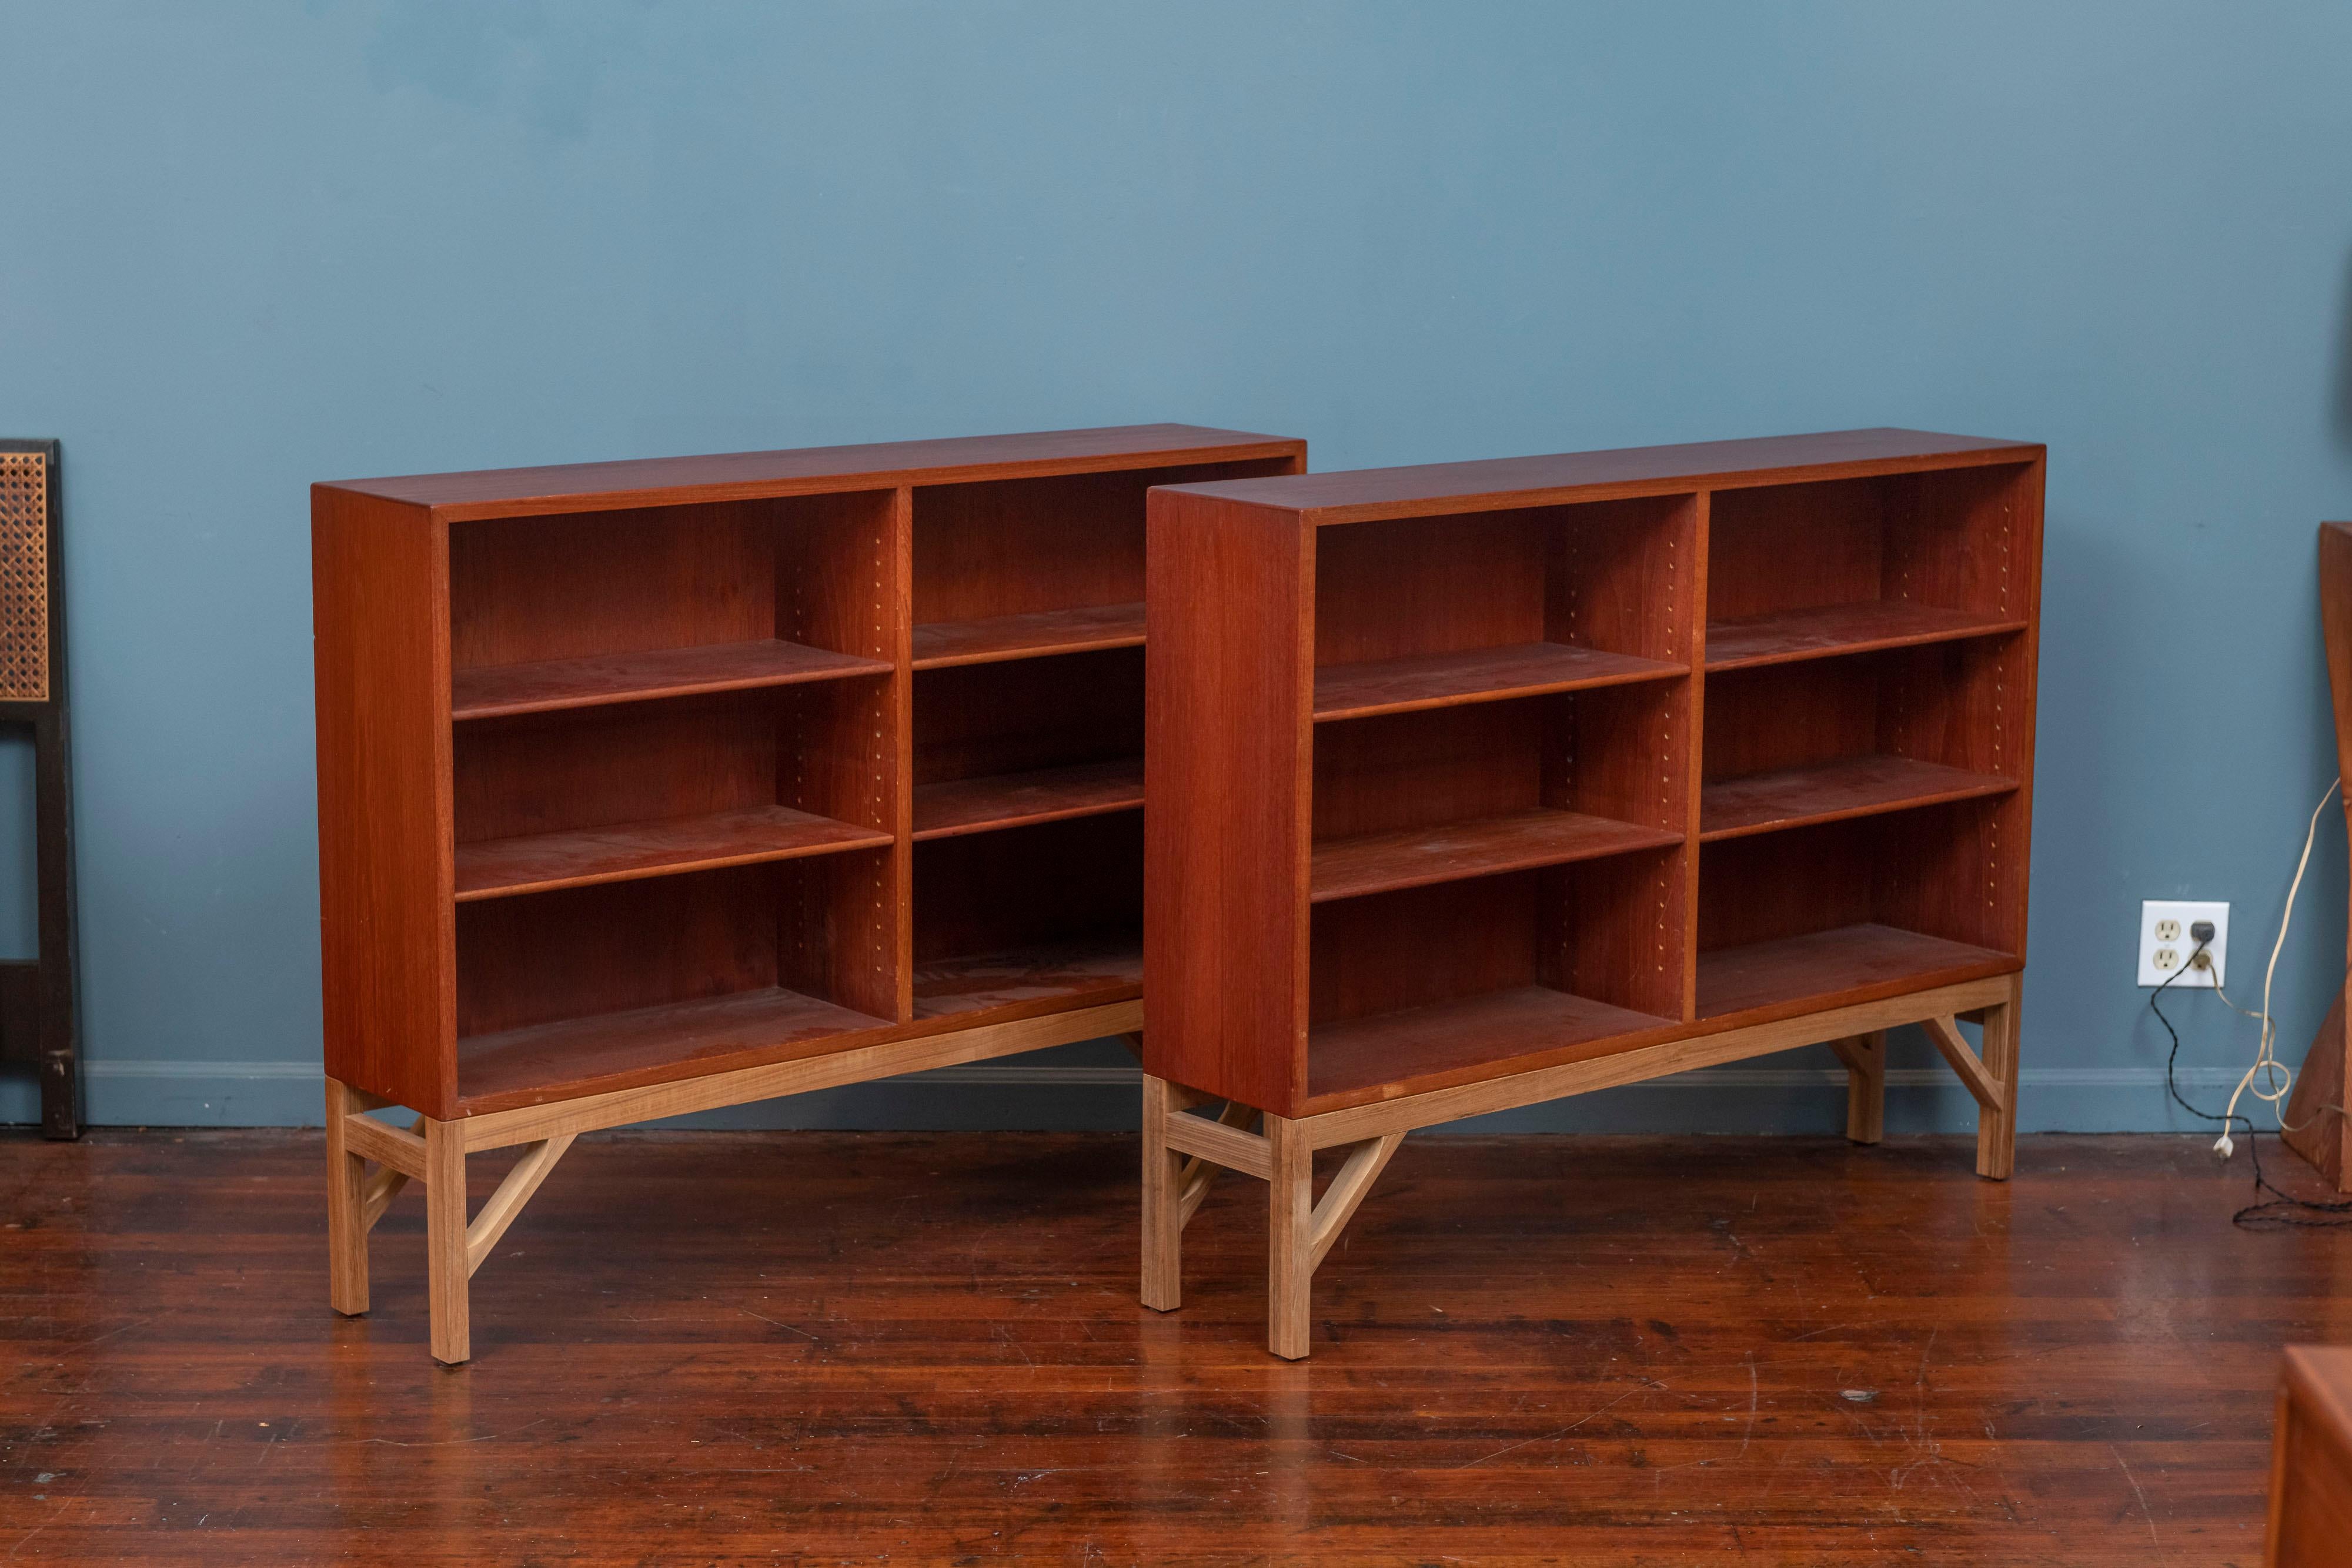 Borge Mogensen design bookcases for C.M. Madsens Fabrikker with Fredericia, Denmark, 1945 / c. 1960. Pair of teak bookcases on oak bases with adjustable shelves, stamped with manufacturers marks to the back.